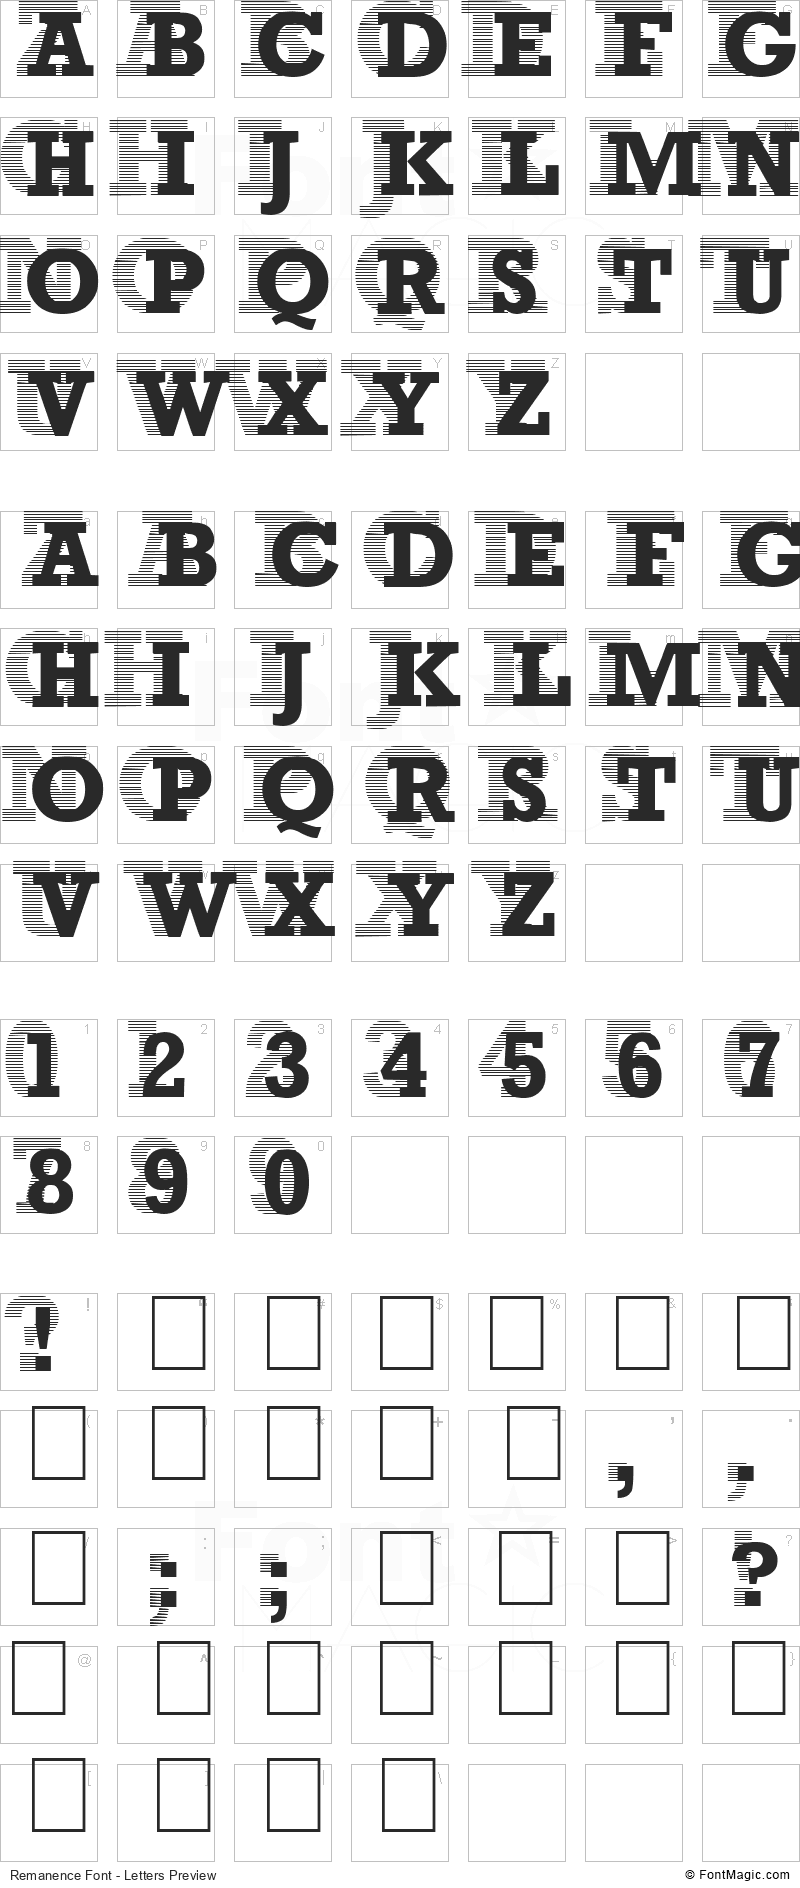 Remanence Font - All Latters Preview Chart